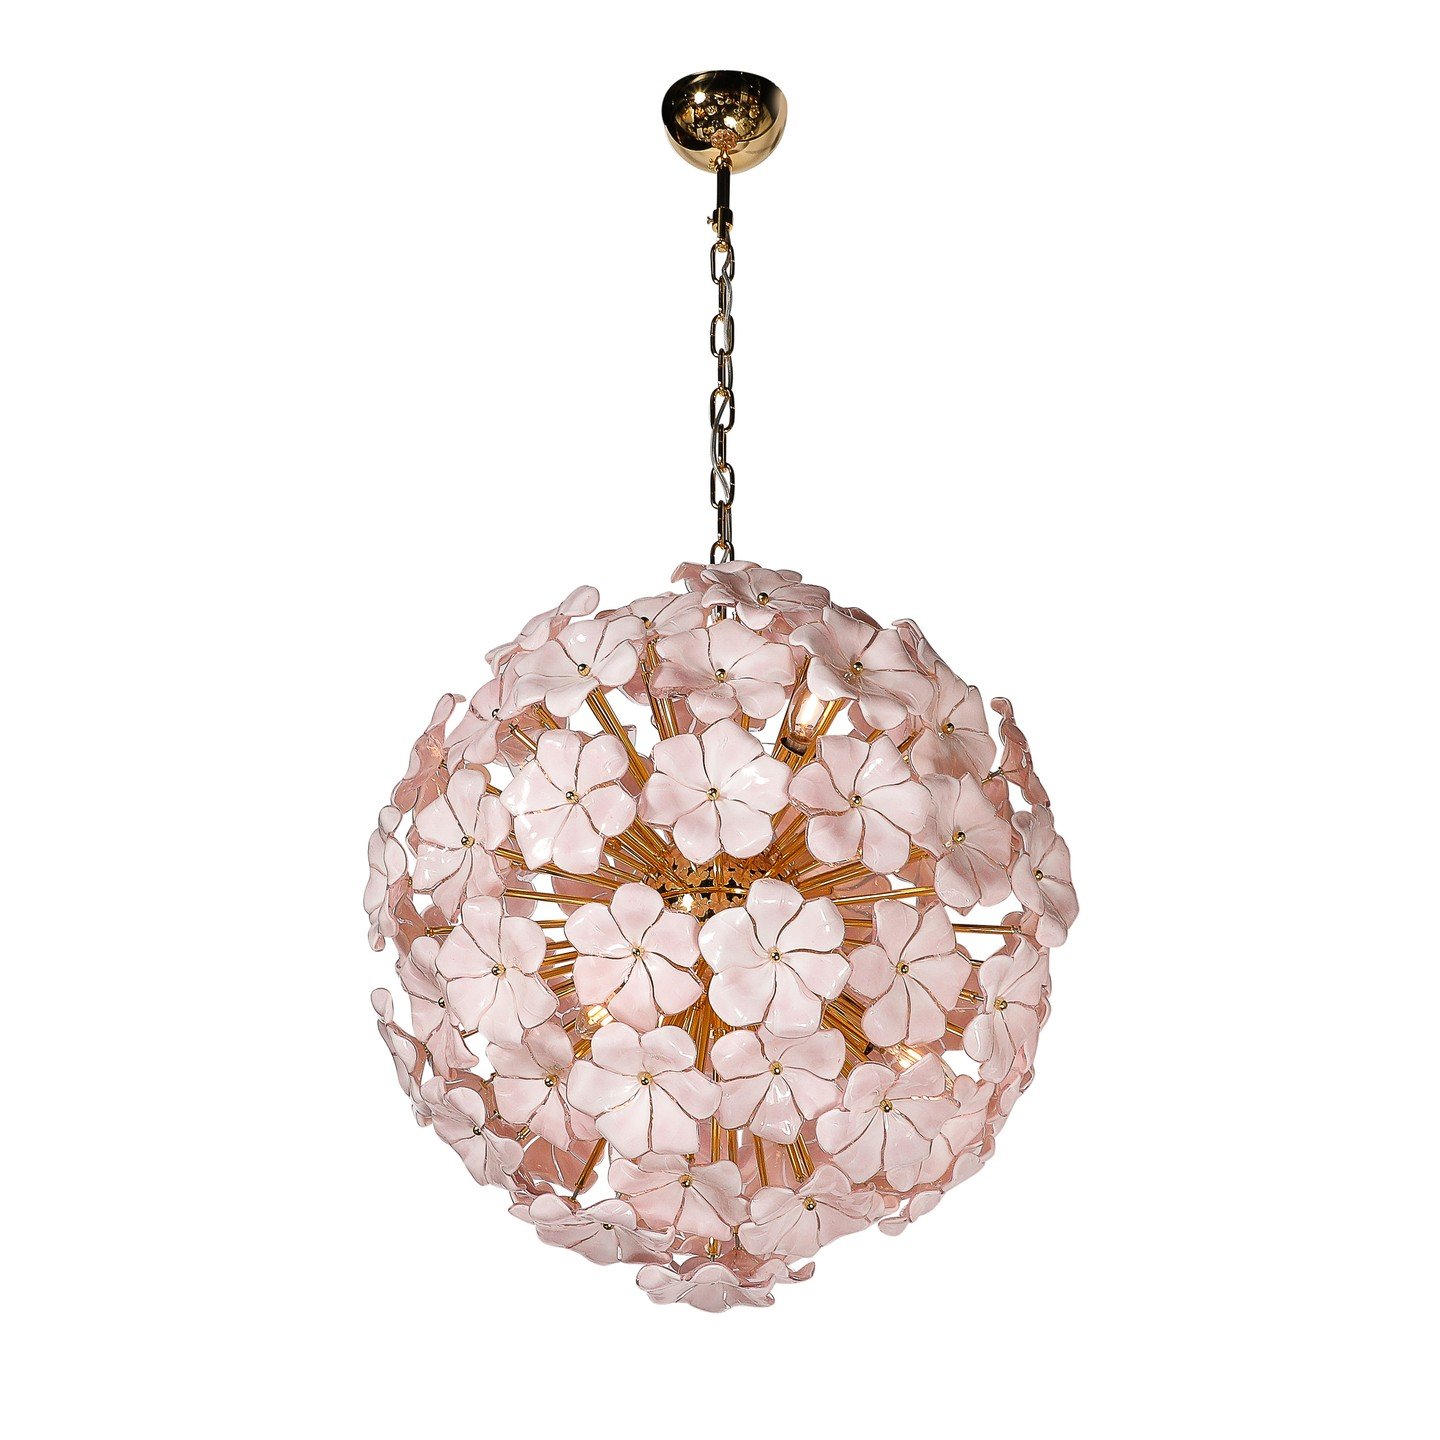 Modernist Hand-Blown Murano Glass Sakura Pink Floral Chandelier &amp; Brass Fittings

This ornate and alluring Modernist Hand-Blown Murano Glass Sakura Pink Floral Chandelier W/ Brass Fittings originates from Italy during the 21st Century. Composed o